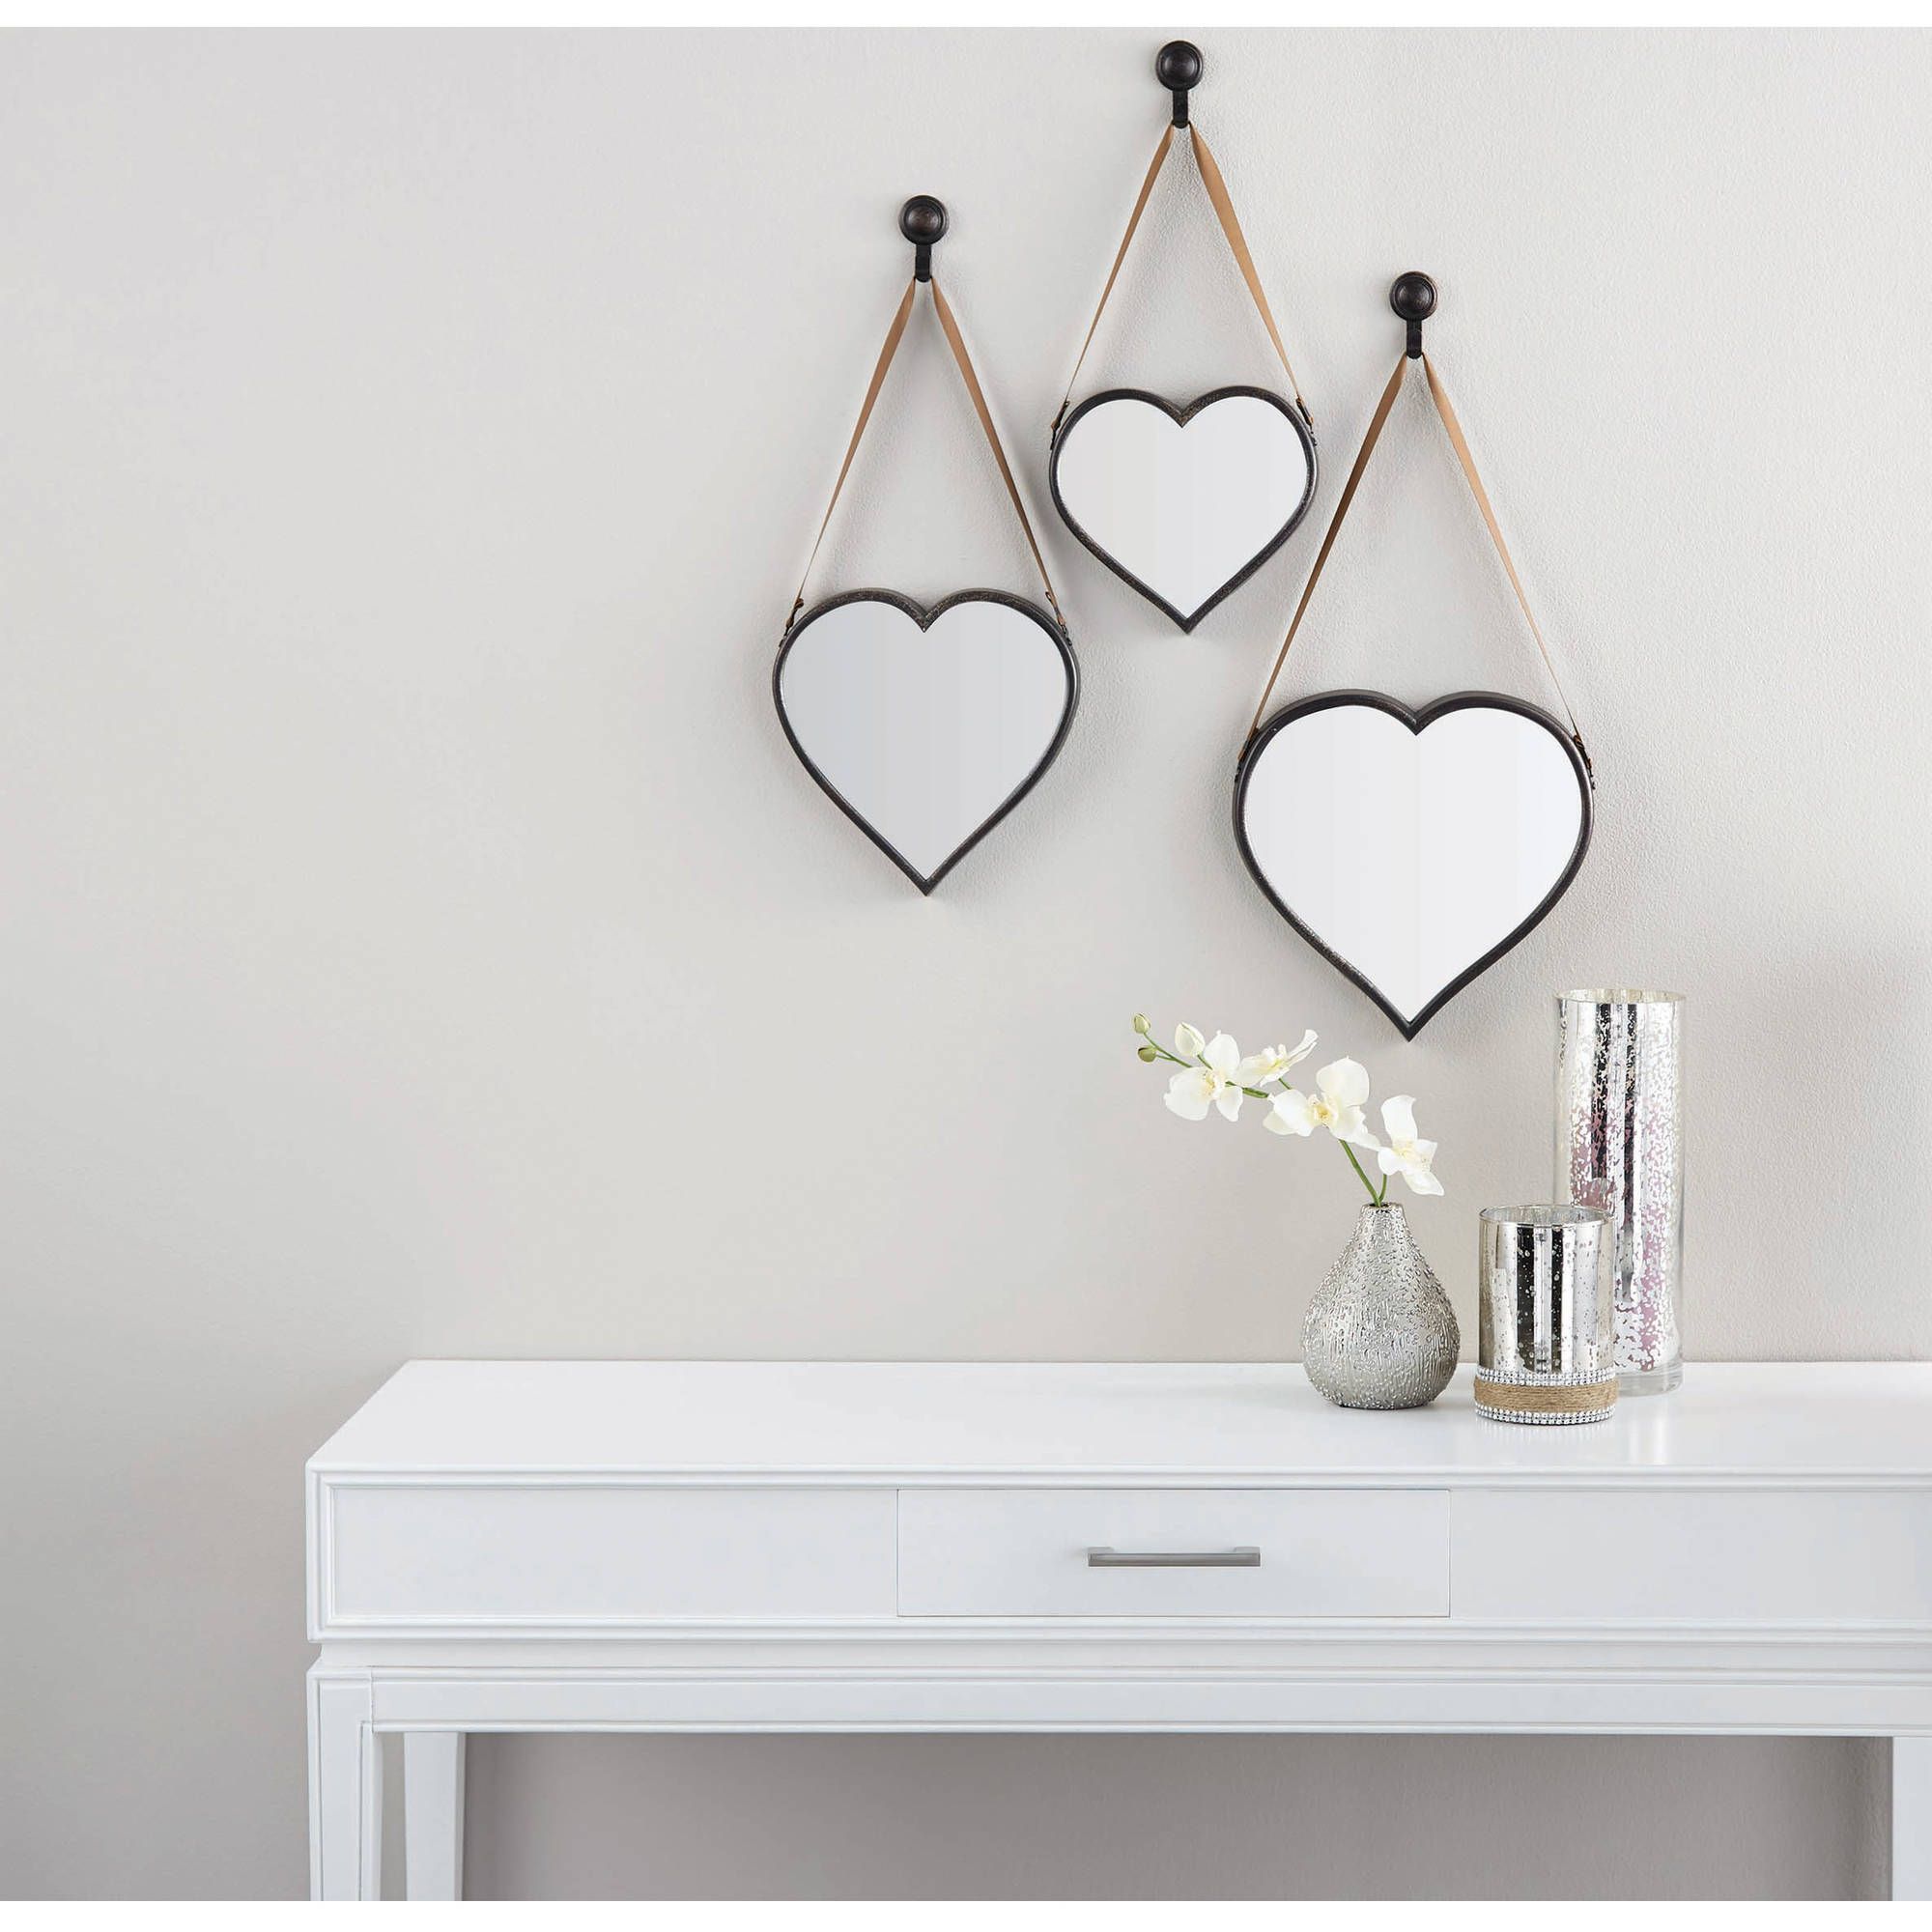 Mainstays 3 Piece Heart Mirror Set With Regard To 2 Piece Heart Shaped Fan Wall Decor Sets (View 1 of 30)